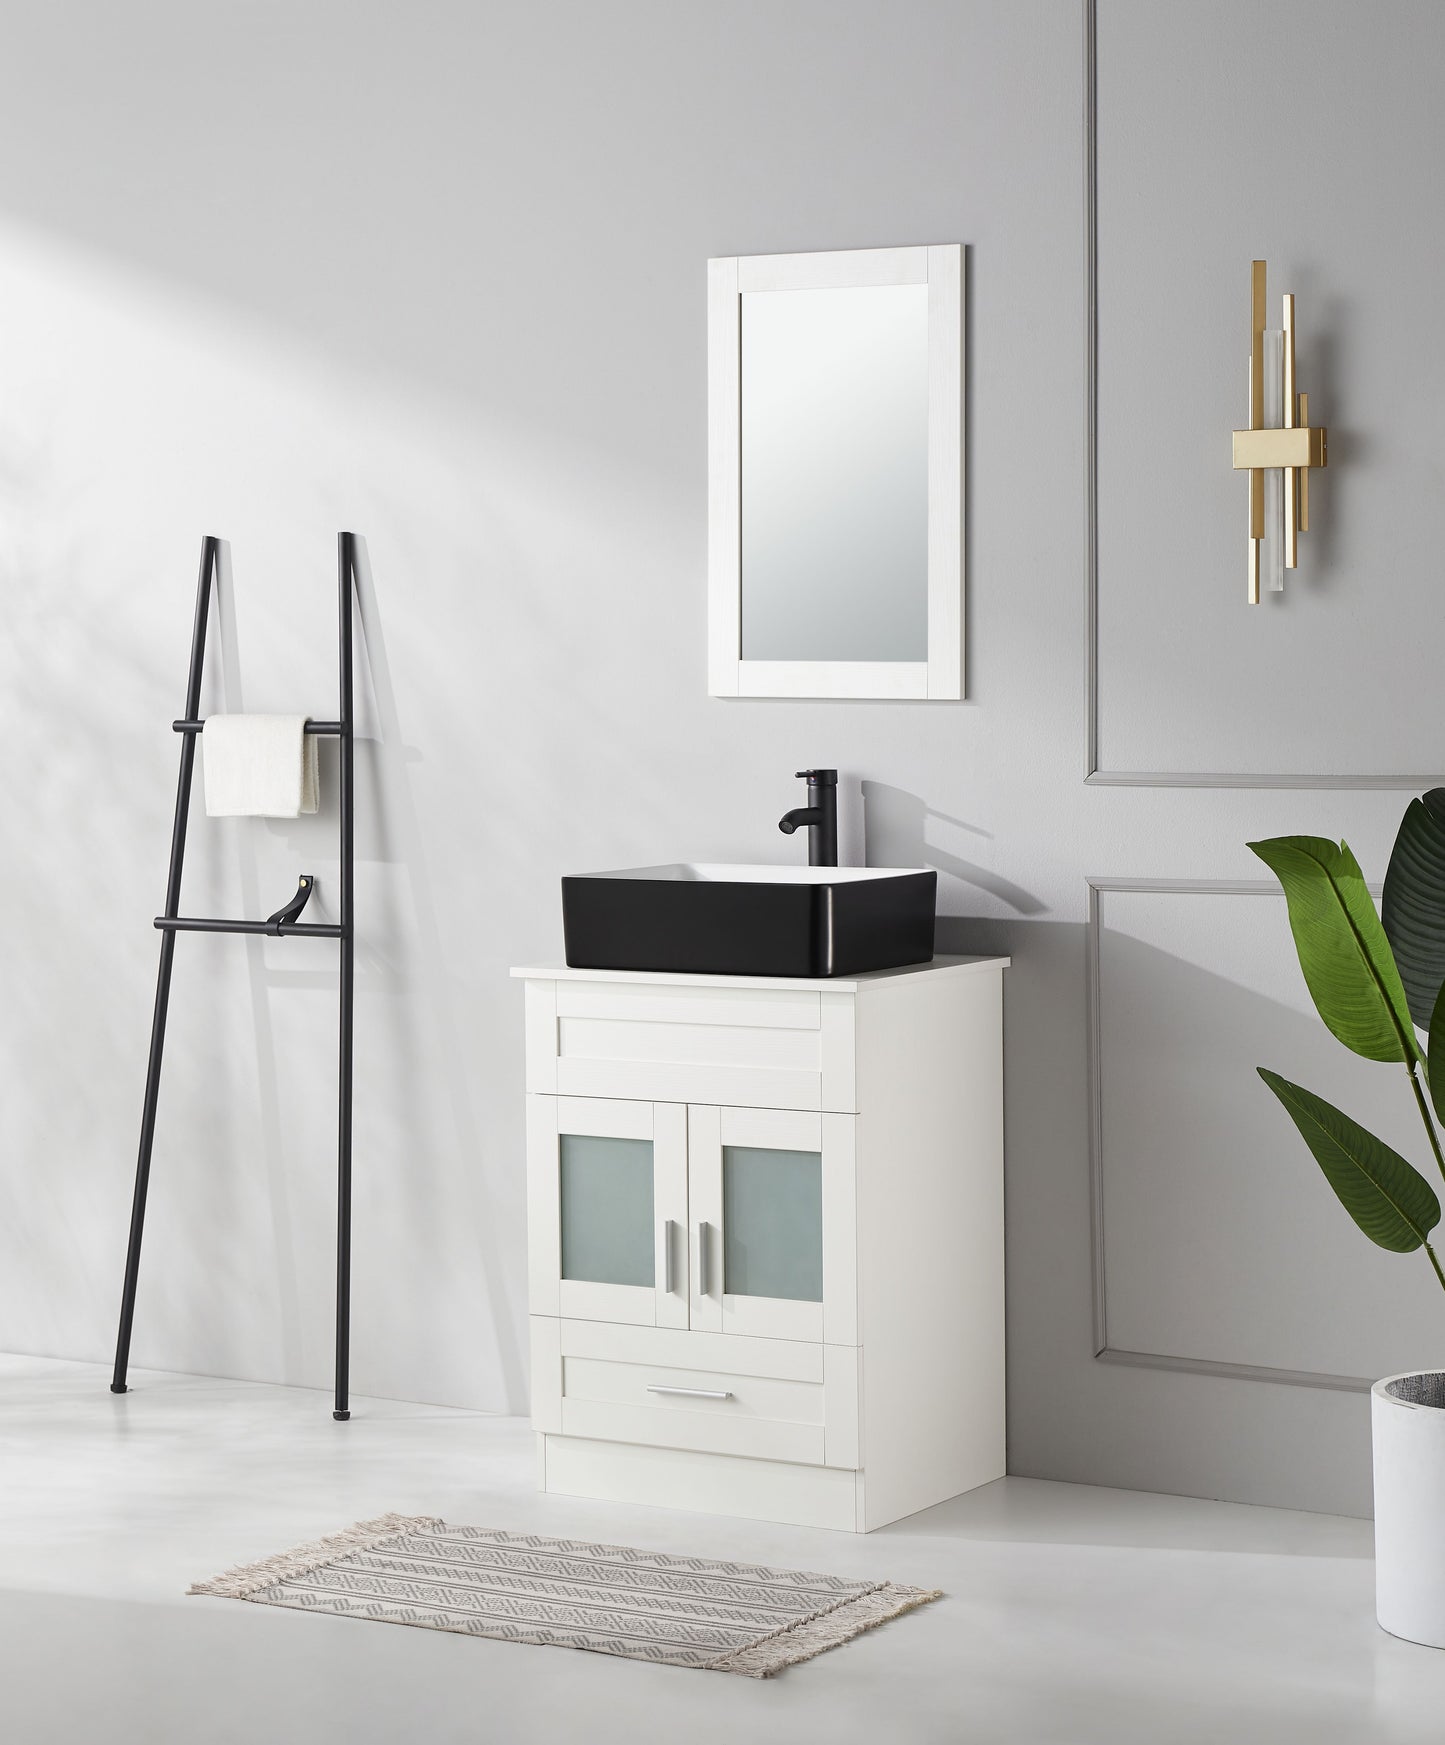 24 in.W x 19 in.D x 32.3 in.H White Wooden Minimalist Bathroom Cabinet with Square Black Ceramic Sink, Faucet, Mirror